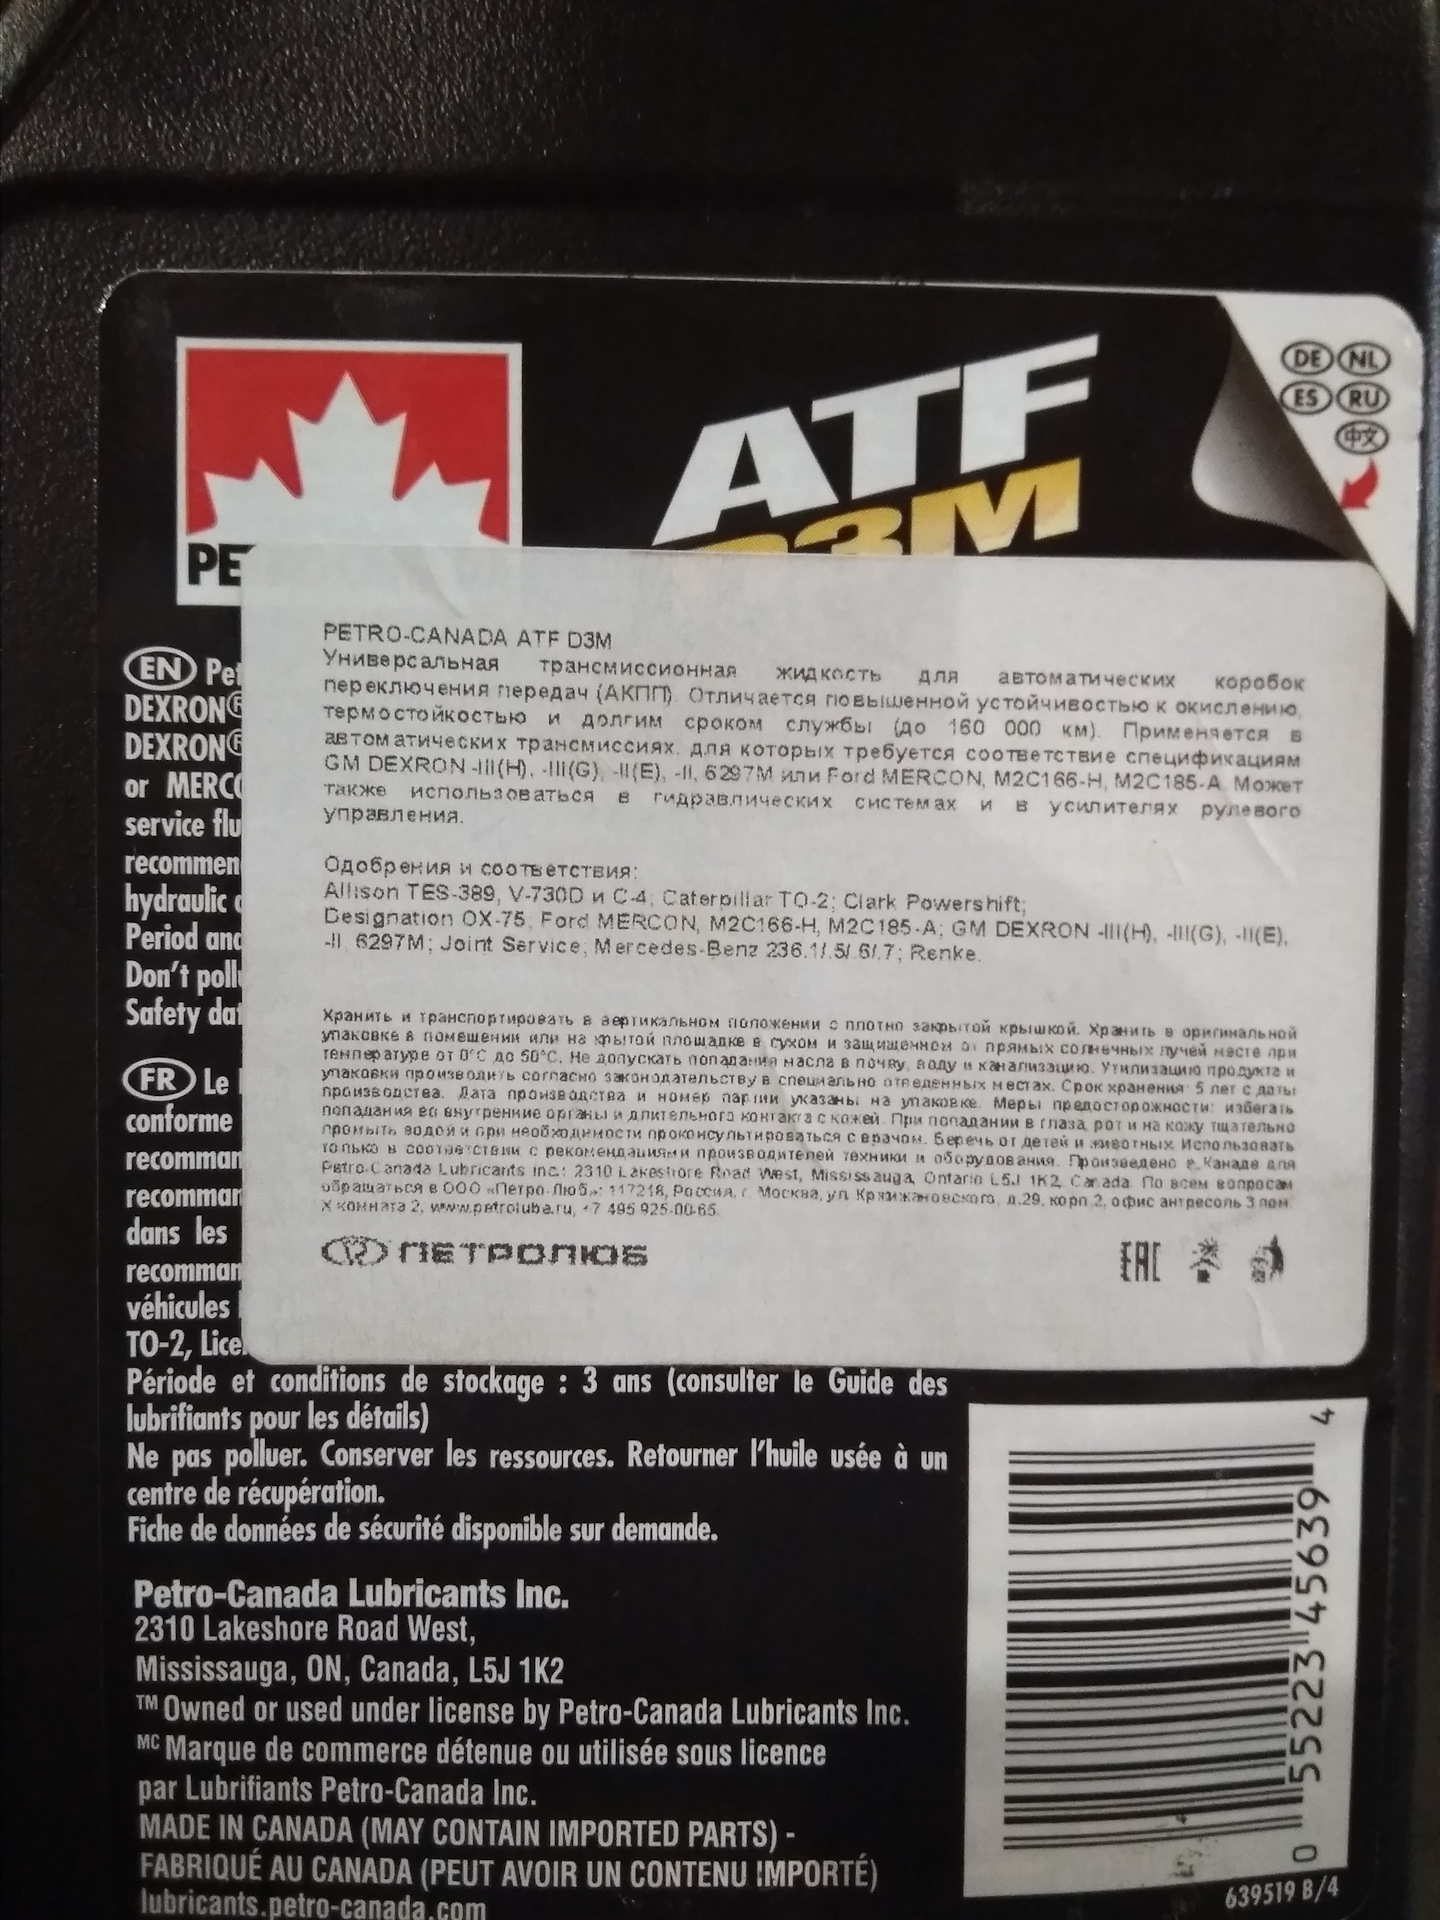 Canada atf. Petro-Canada ATF d3m. Масло Petro Canada ATF d3m. Petro-Canada ATF D-III (d3m). Petro-Canada ATF D-III (d3m) жидкость для АКПП 1л.